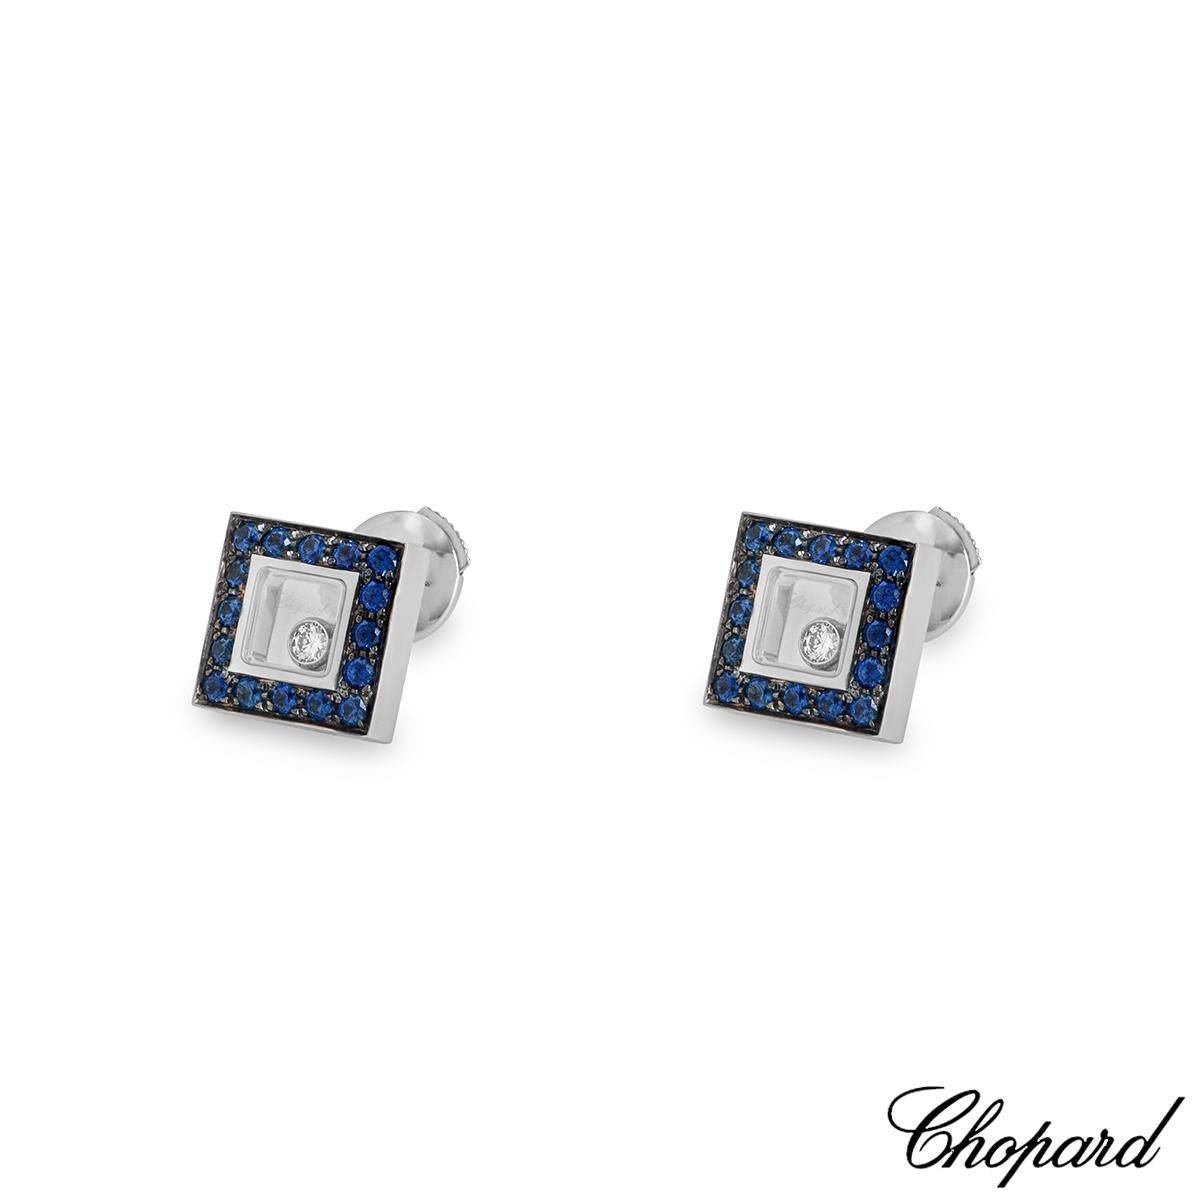 A beautiful pair of 18k white gold Happy Diamonds earrings by Chopard. The earrings feature a square motif set to the centre with a round brilliant cut diamond, floating behind the signature Chopard signed glass, with a total weight of 0.11ct.  Each